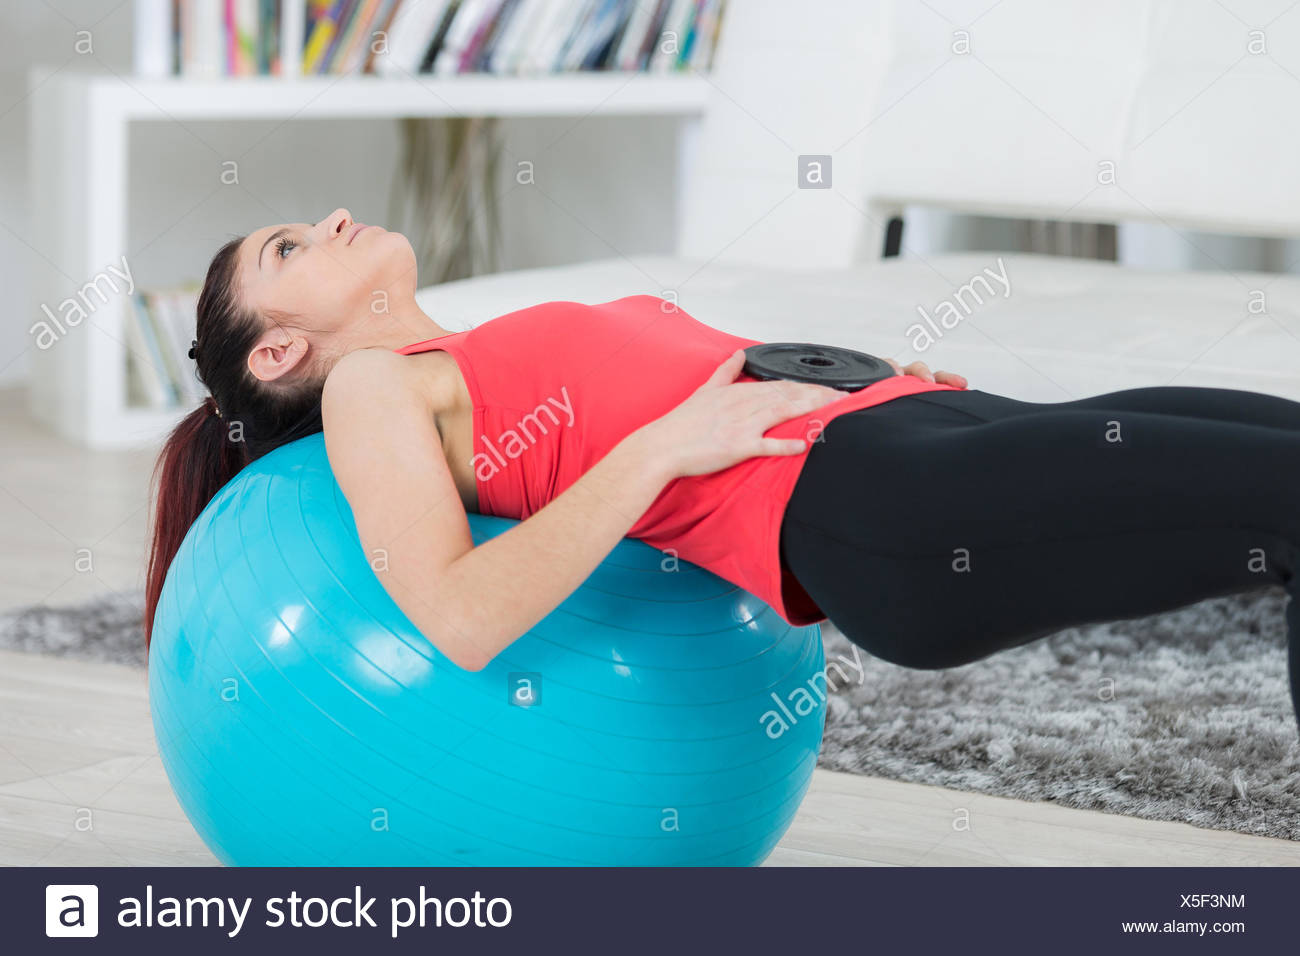 Fitness Girl Doing Crunches Lying On The Floor At Home Stock Photo